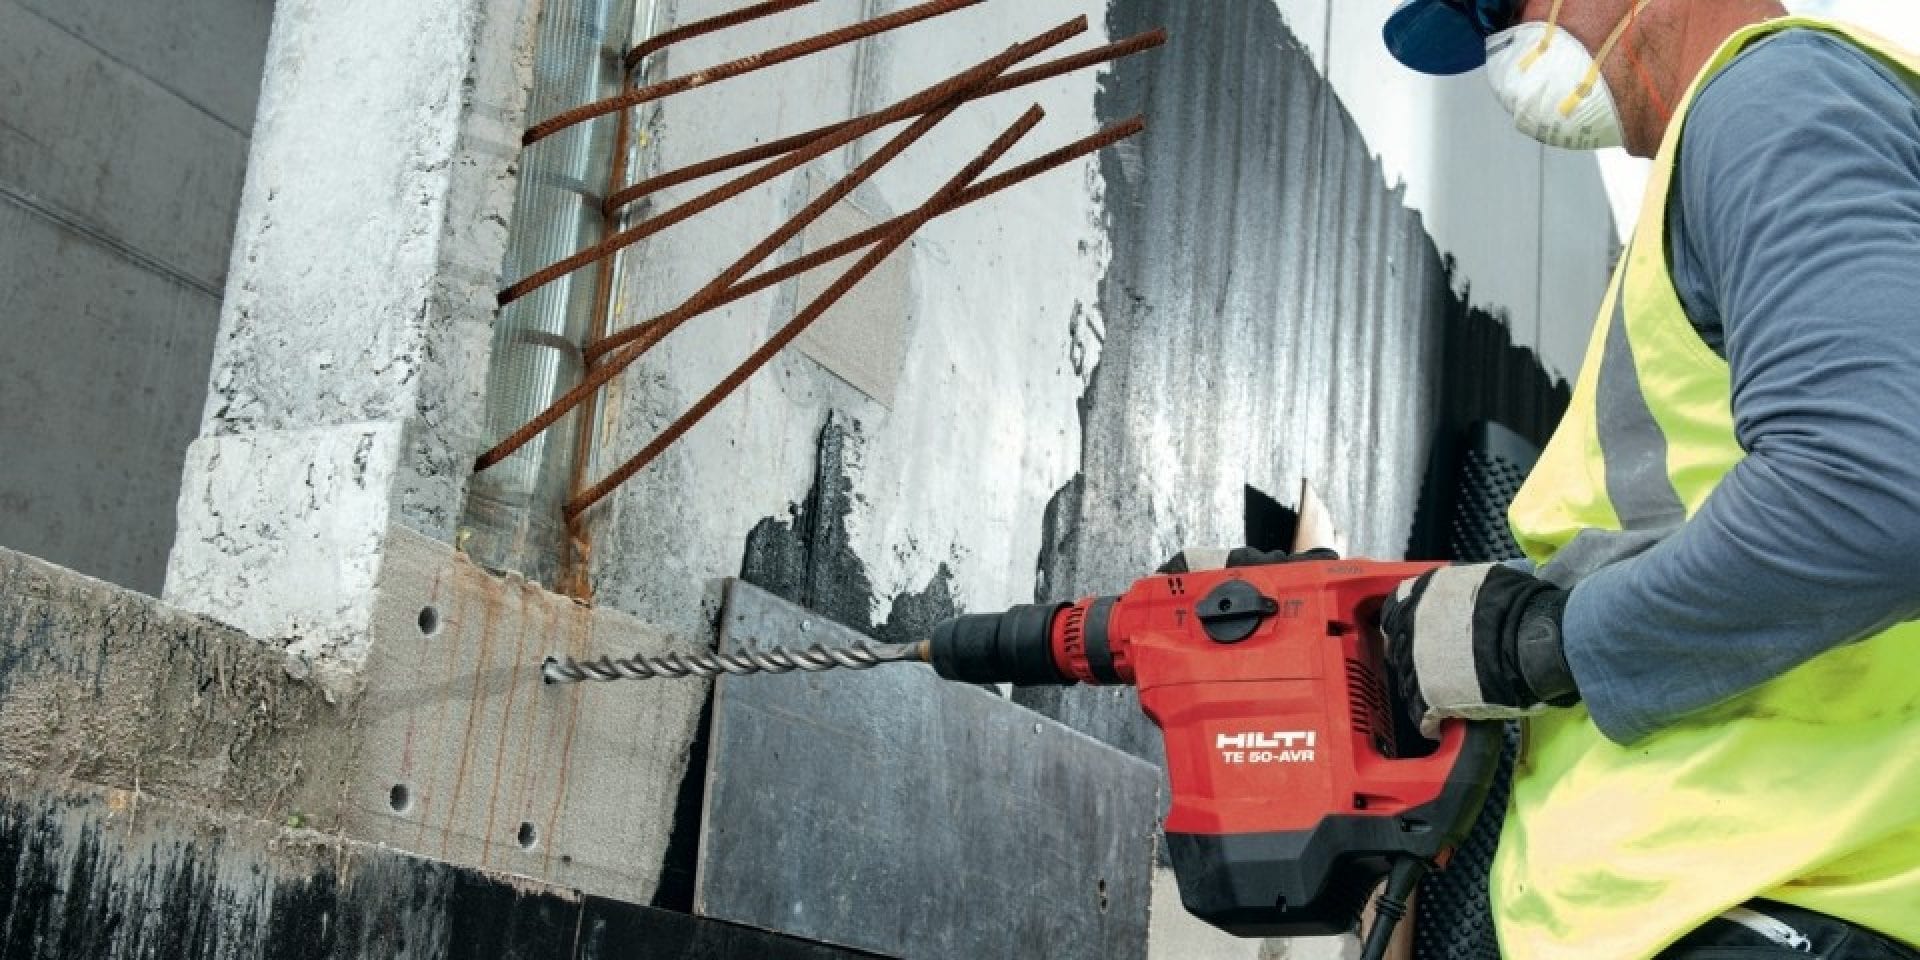 A worker drilling into a wall with a Hilti tool